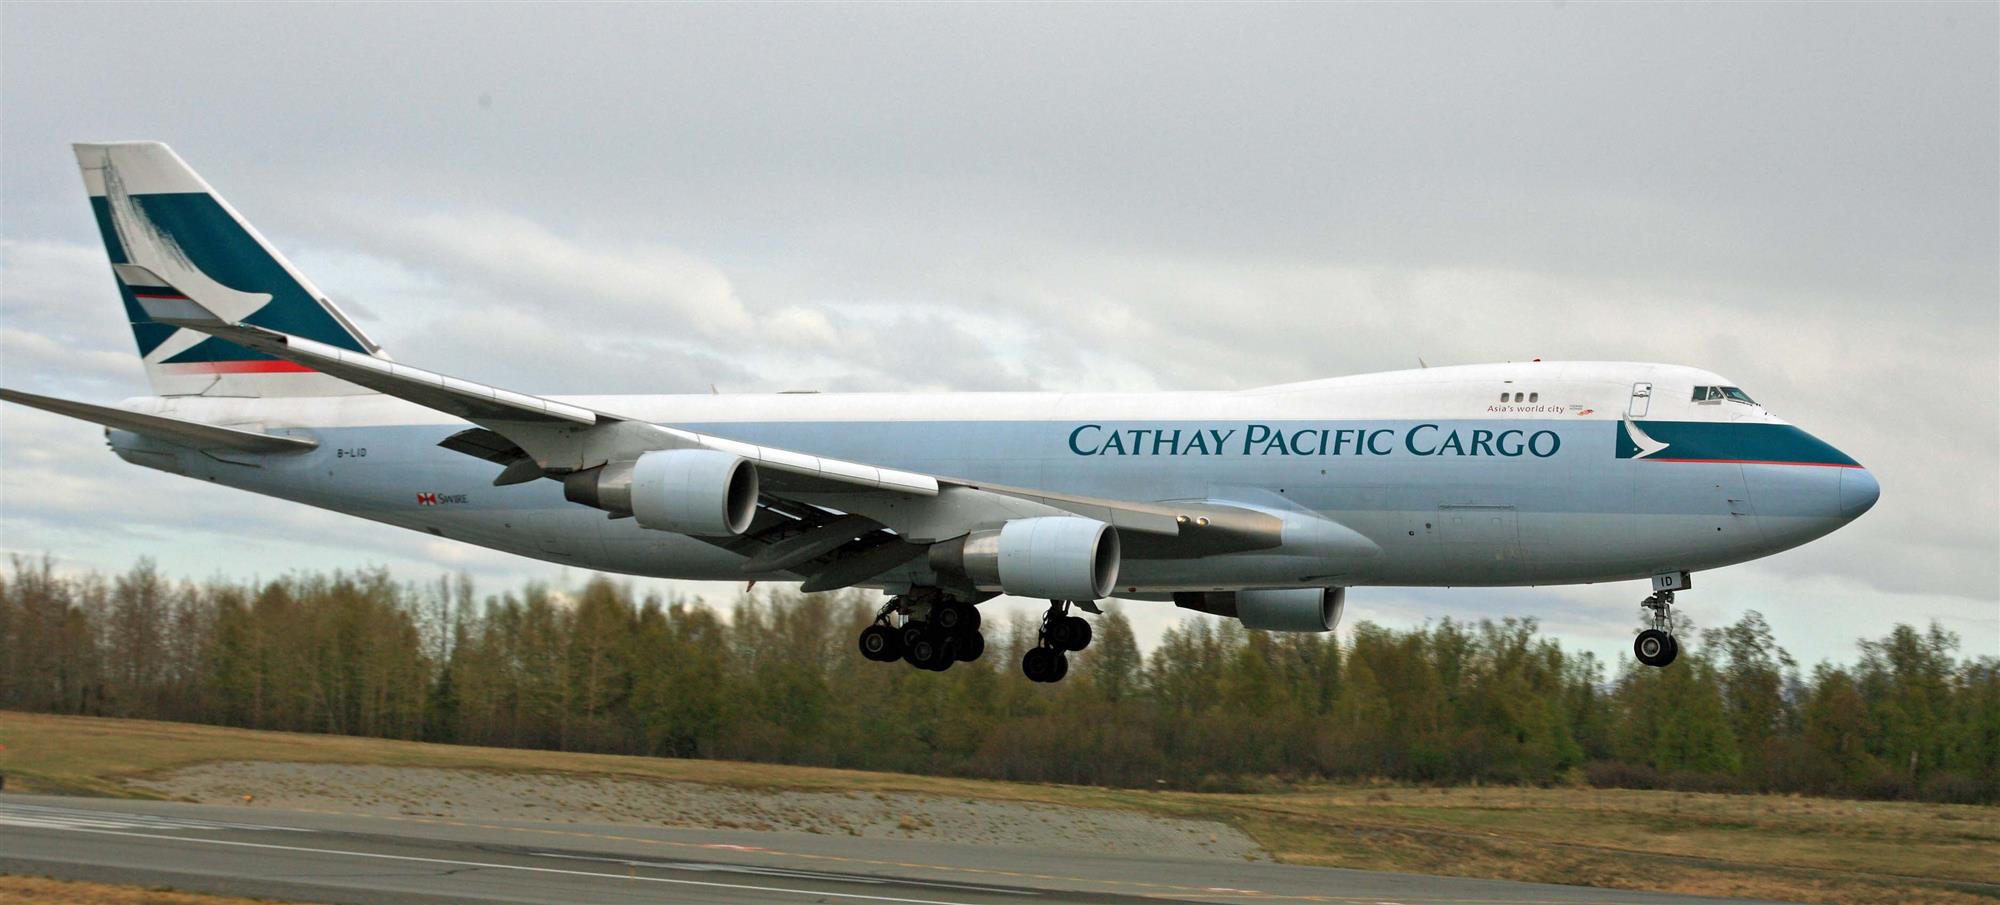 Self Photos / Files - Cathay_Pacific_Cargo_747_about_to_touch_down_at_ANC_(6194226378)